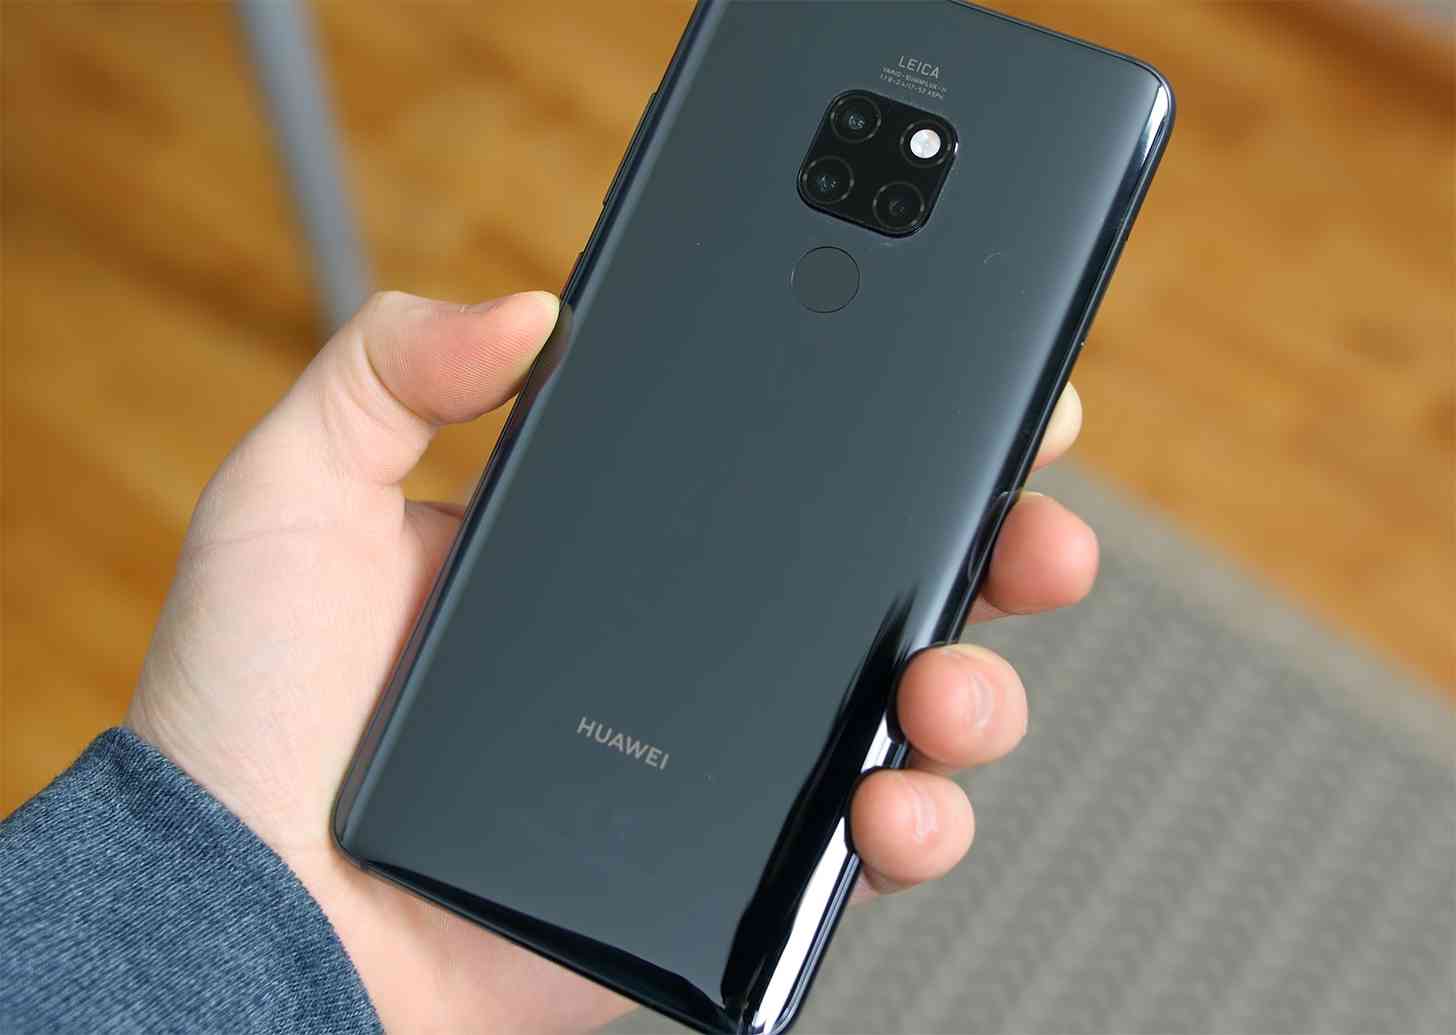 Huawei Mate 20 hands-on